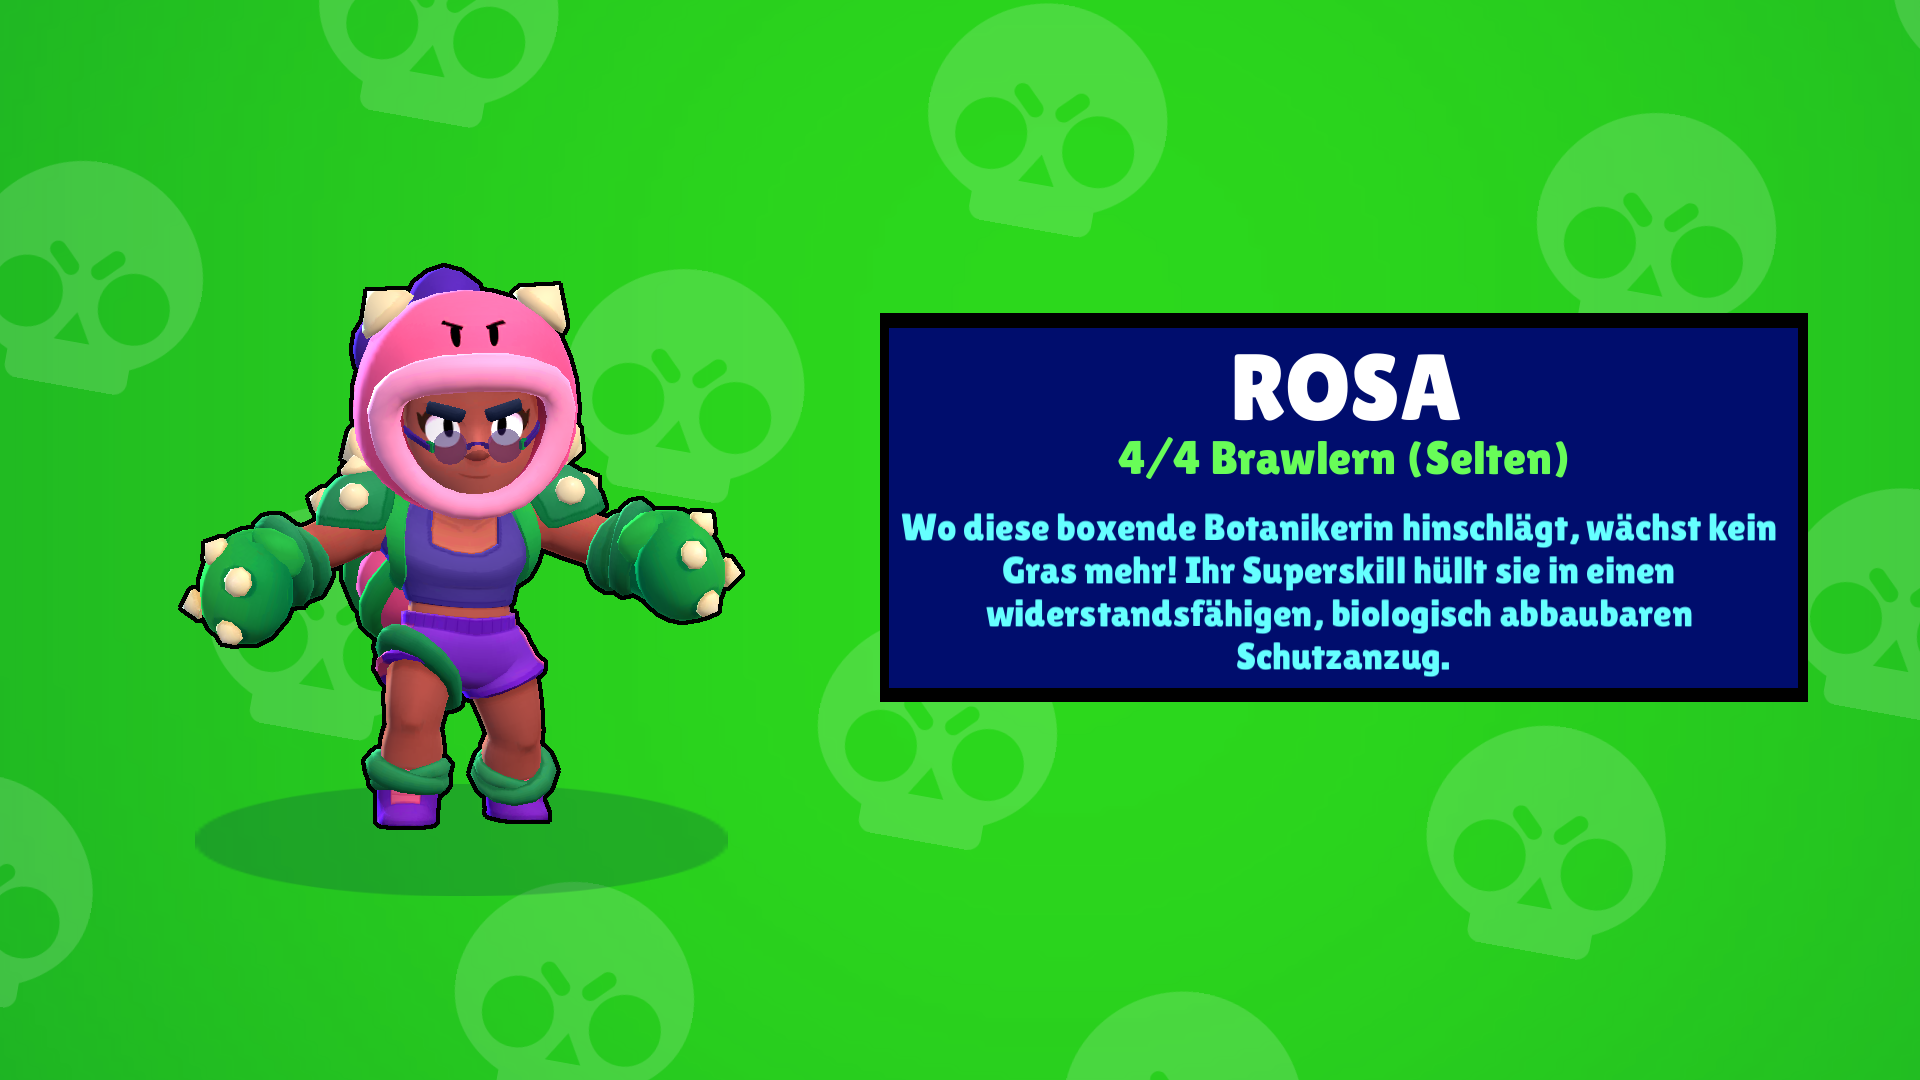 Is Rosa still too strong